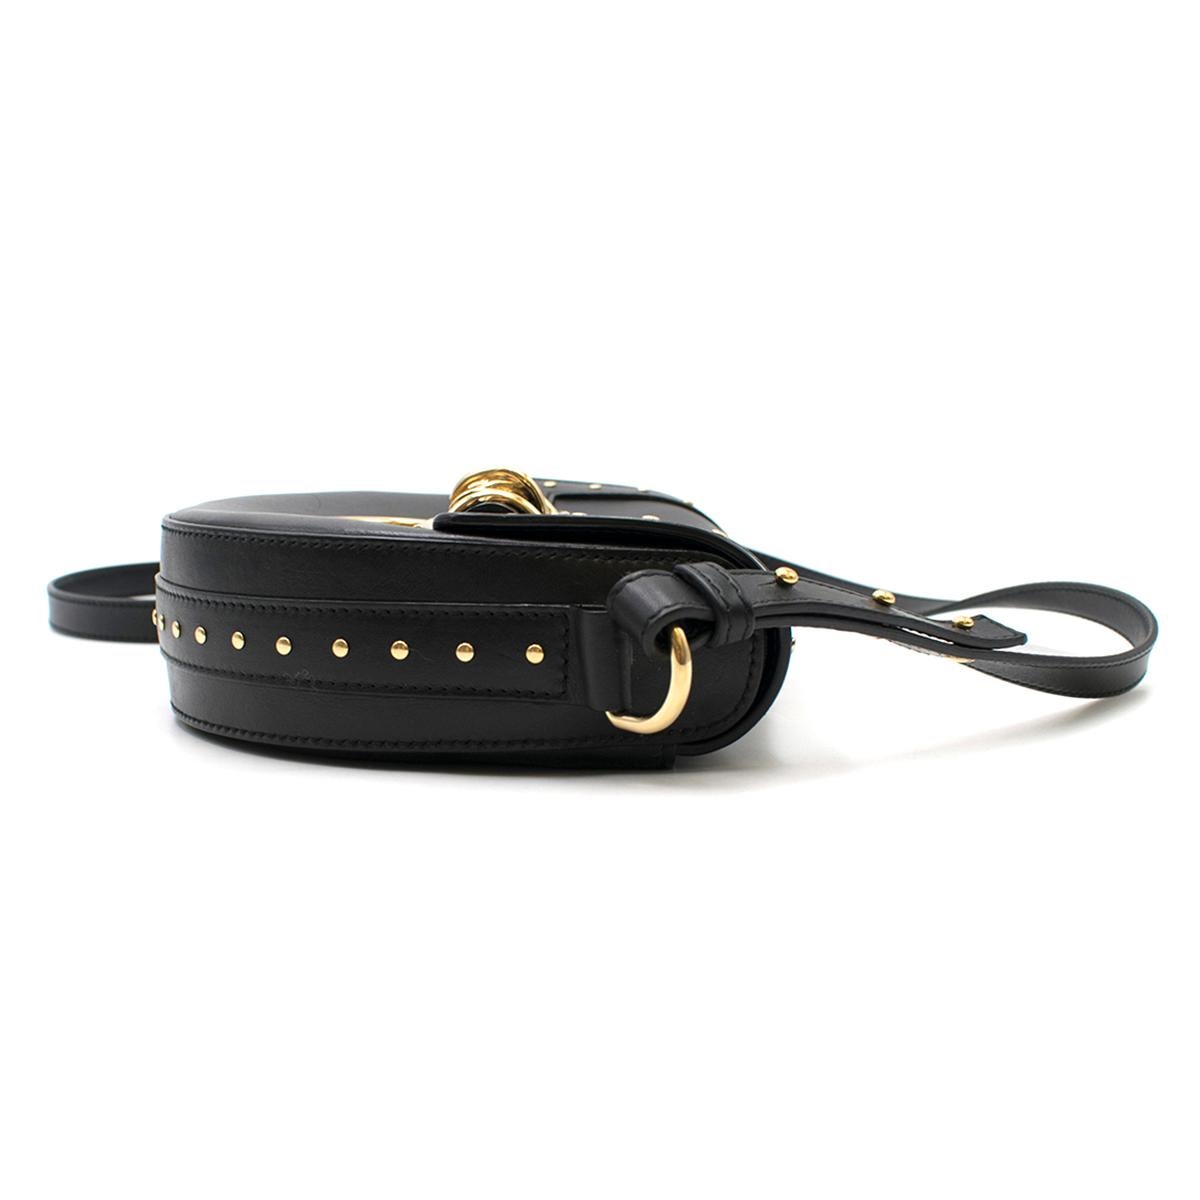 Balmain 44-18 Glove Black Leather Crossbody Bag w/Studs In New Condition For Sale In London, GB